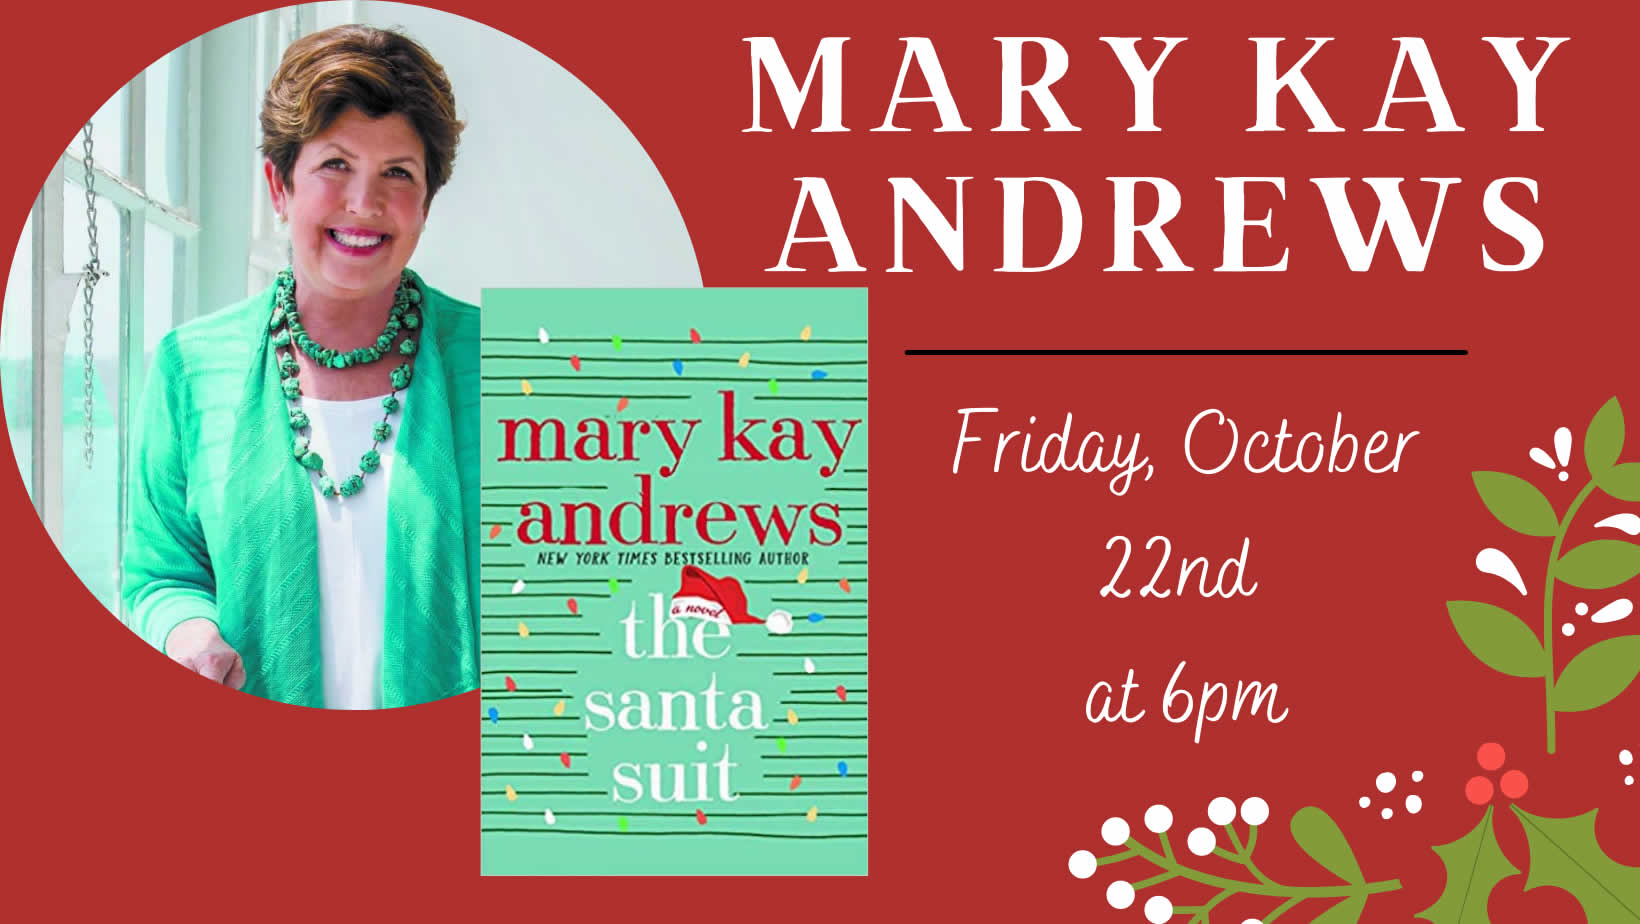 Mary Kay Andrews Presents The Santa Suit